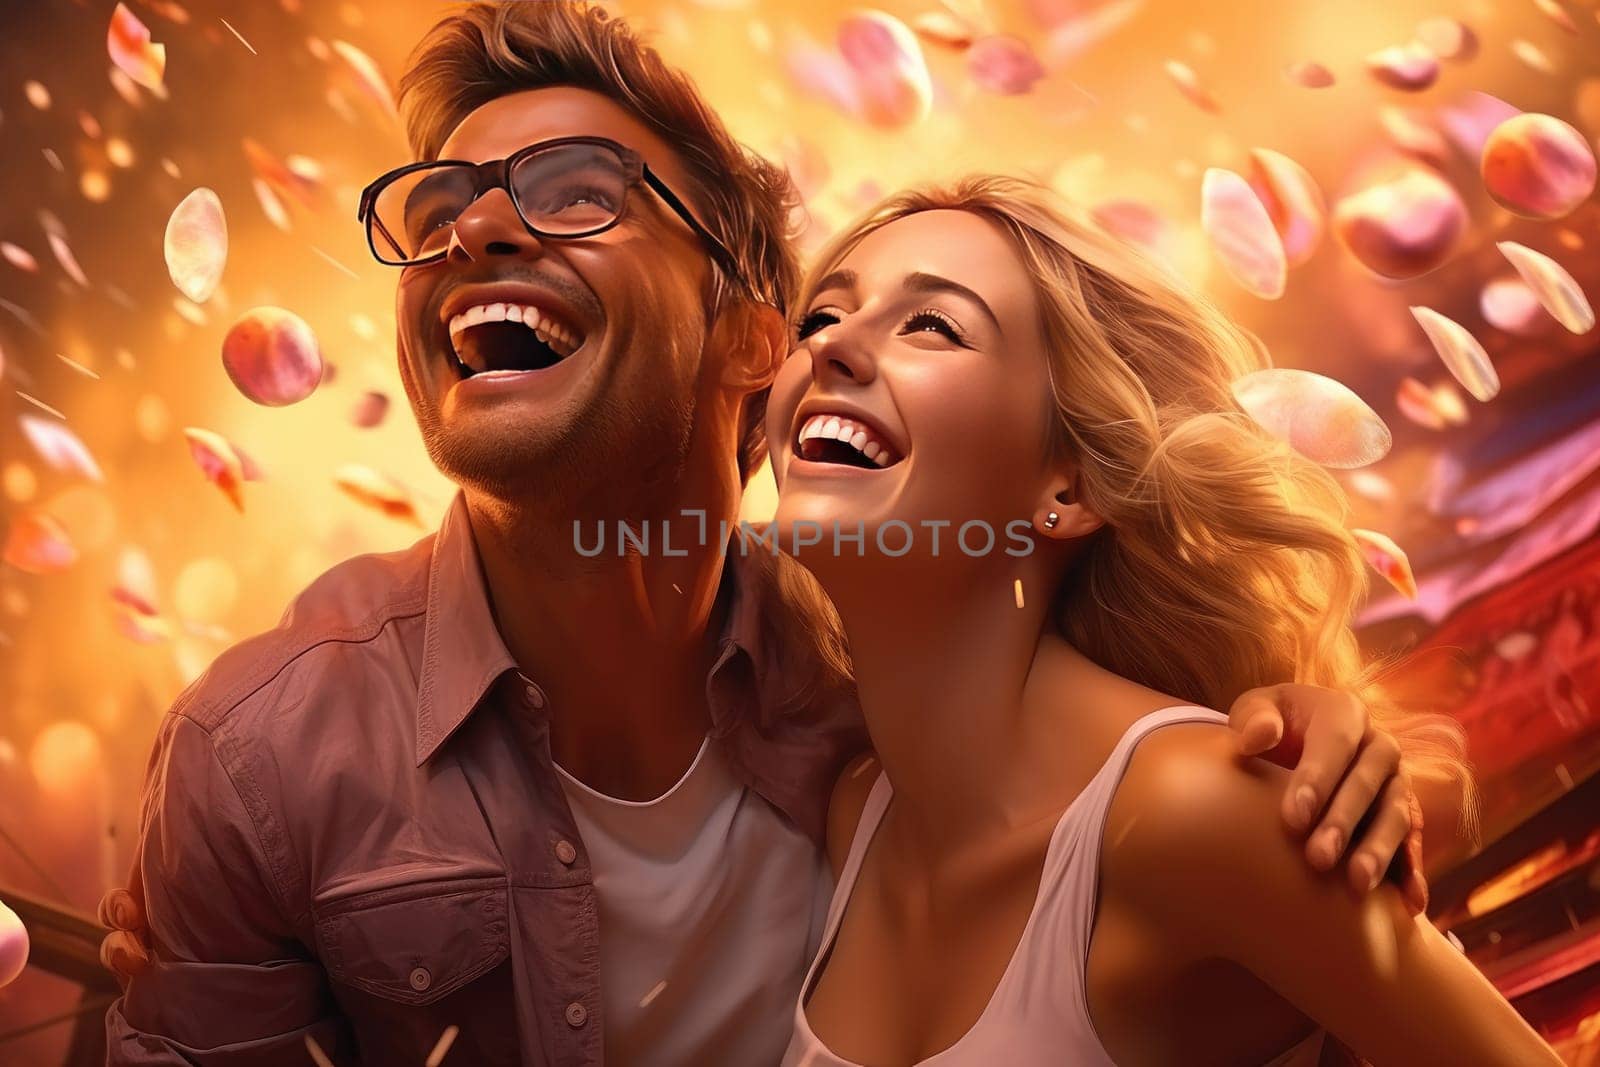 A delightful image capturing a loving couple sharing moments of joy and happiness during a romantic evening, expressing their deep affection and connection.